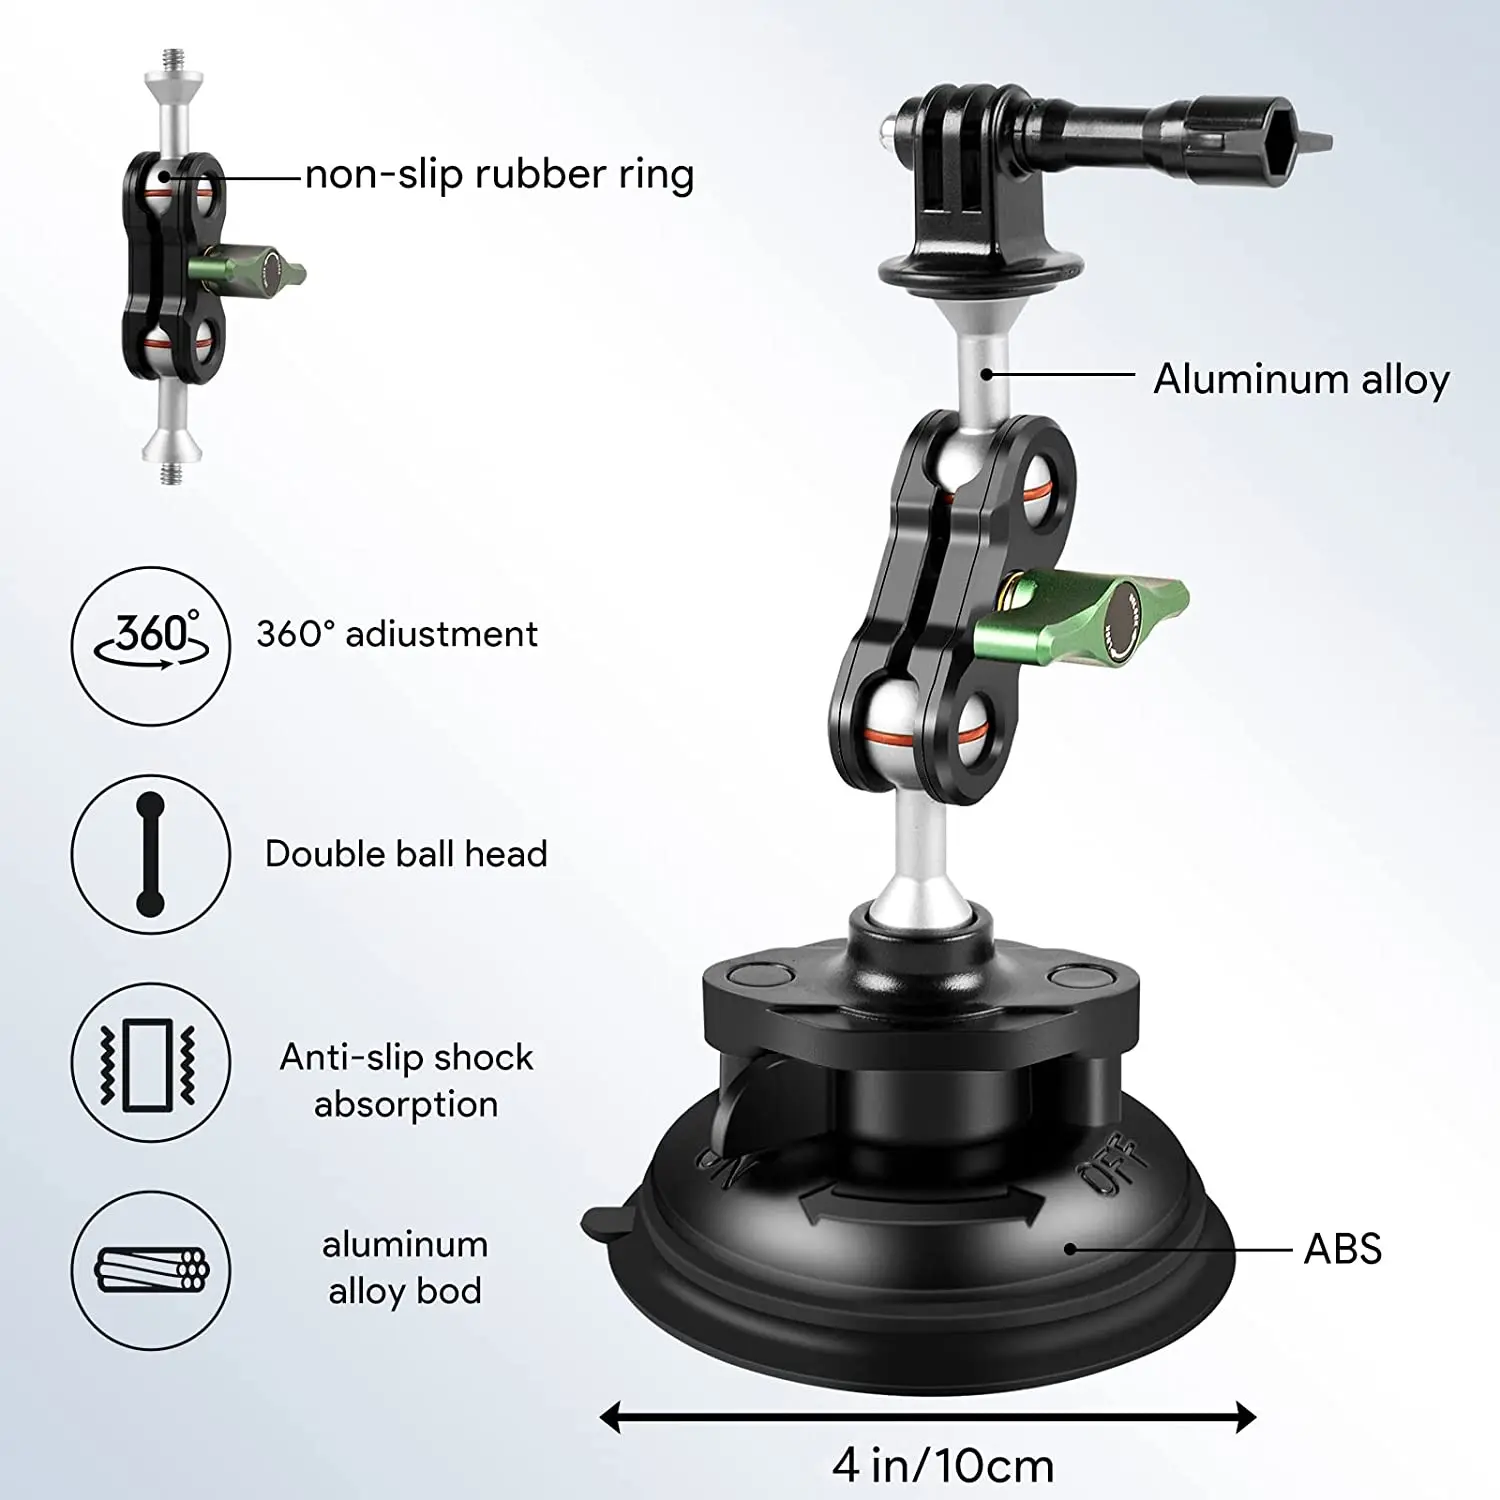 REYGEAK Heavy Duty Suction Cup Mount with 360° Ballhead Magic Arm Double Ball Head Adapter for GoPro Insta360 DSLR Cameras